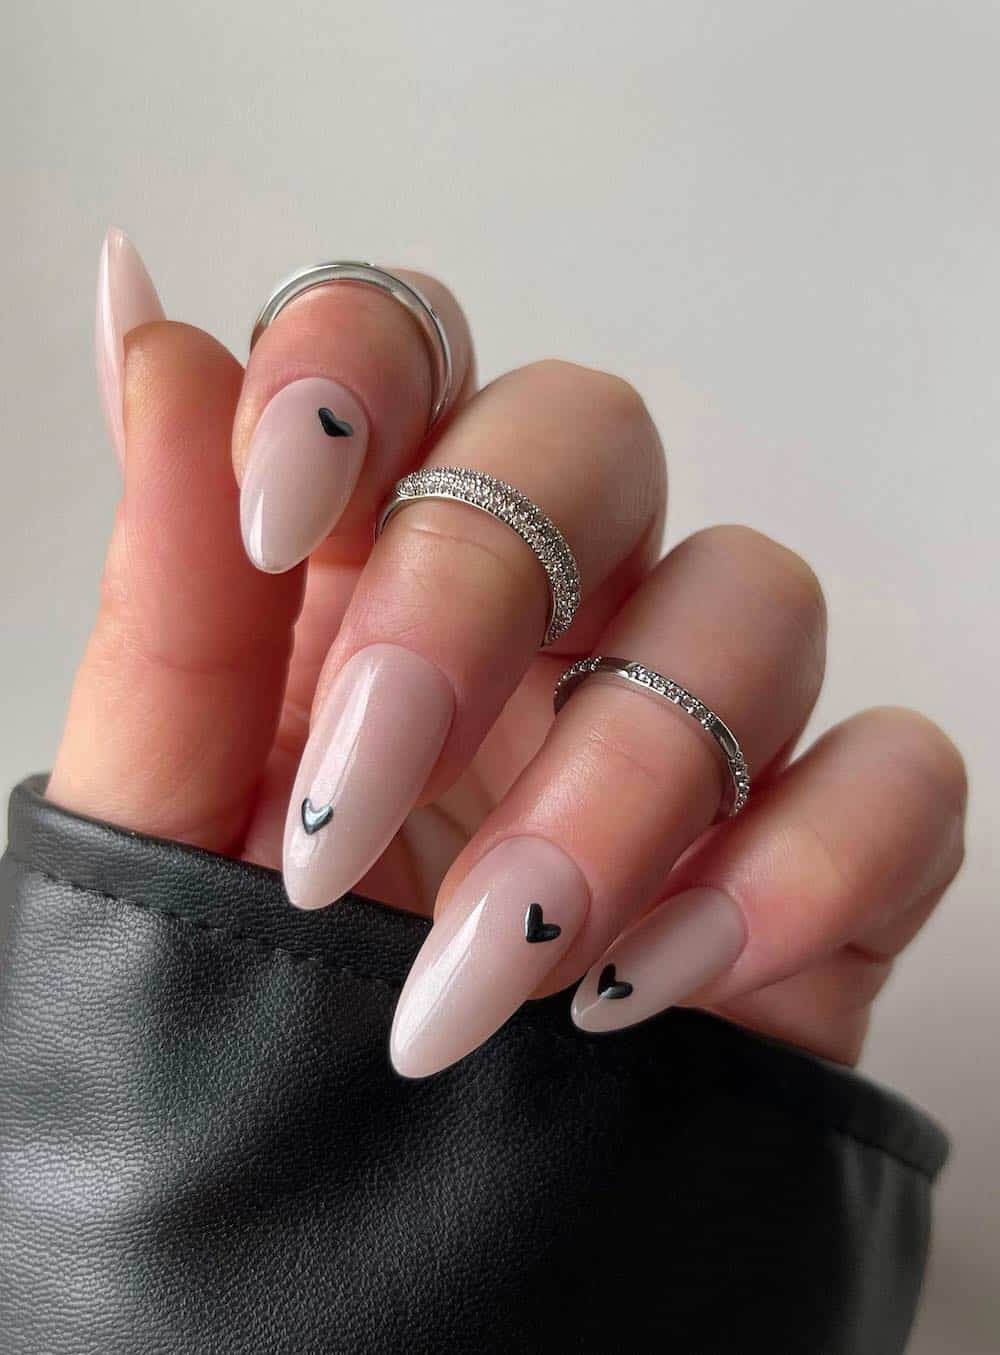 A hand with long almond nails painted a milky white with black heart details